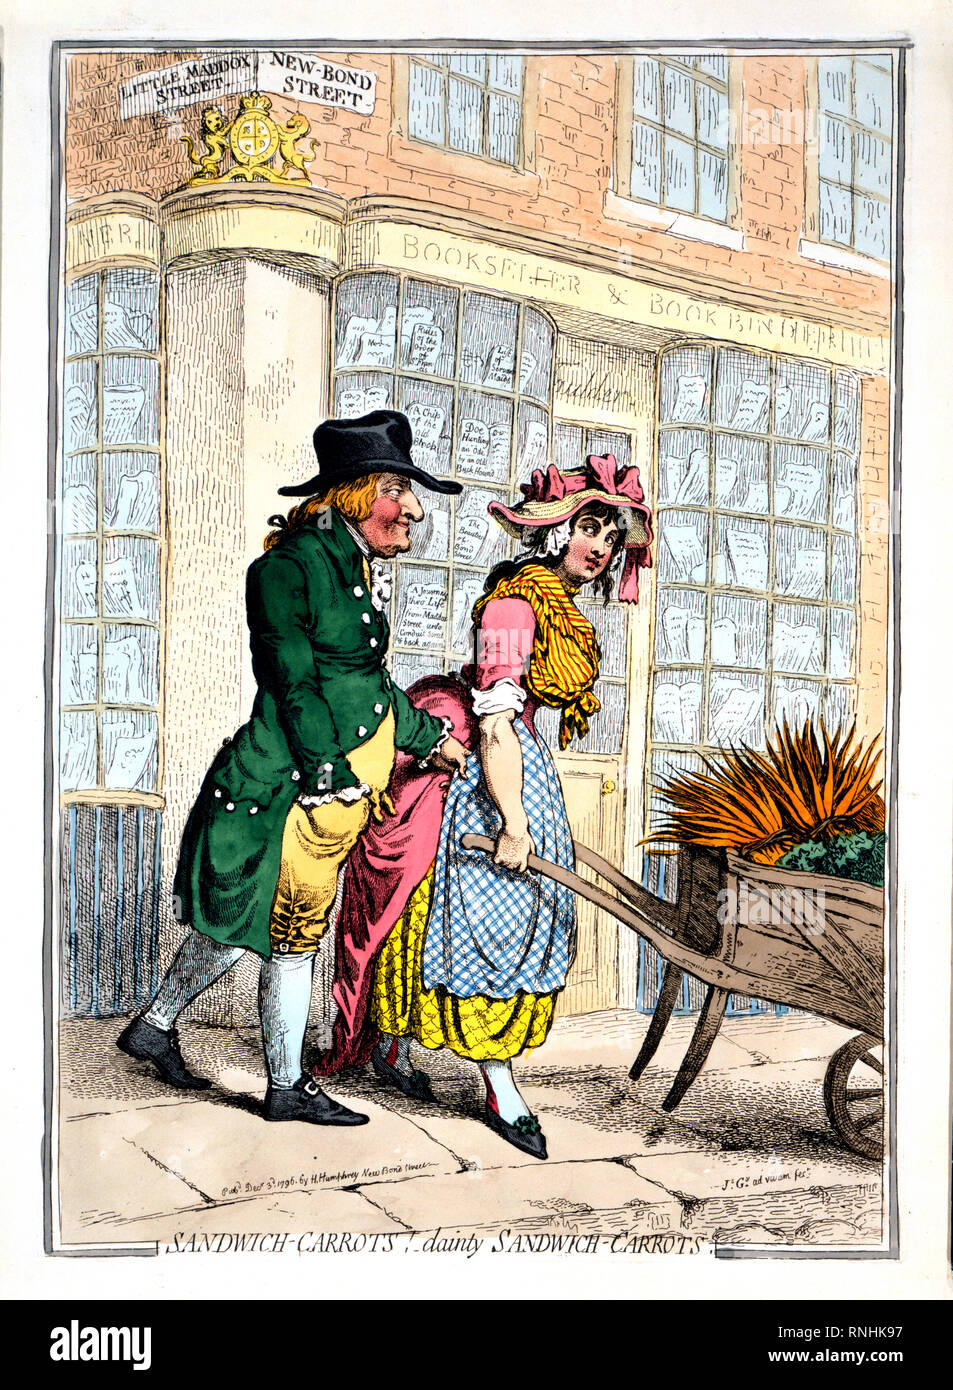 A buxom girl pushing a wheelbarrow of carrots along Bond Street, looking over her shoulder at an older man, possibly the son of John Montagu, 4th Earl of Sandwich, who is tugging at her apron. Stock Photo